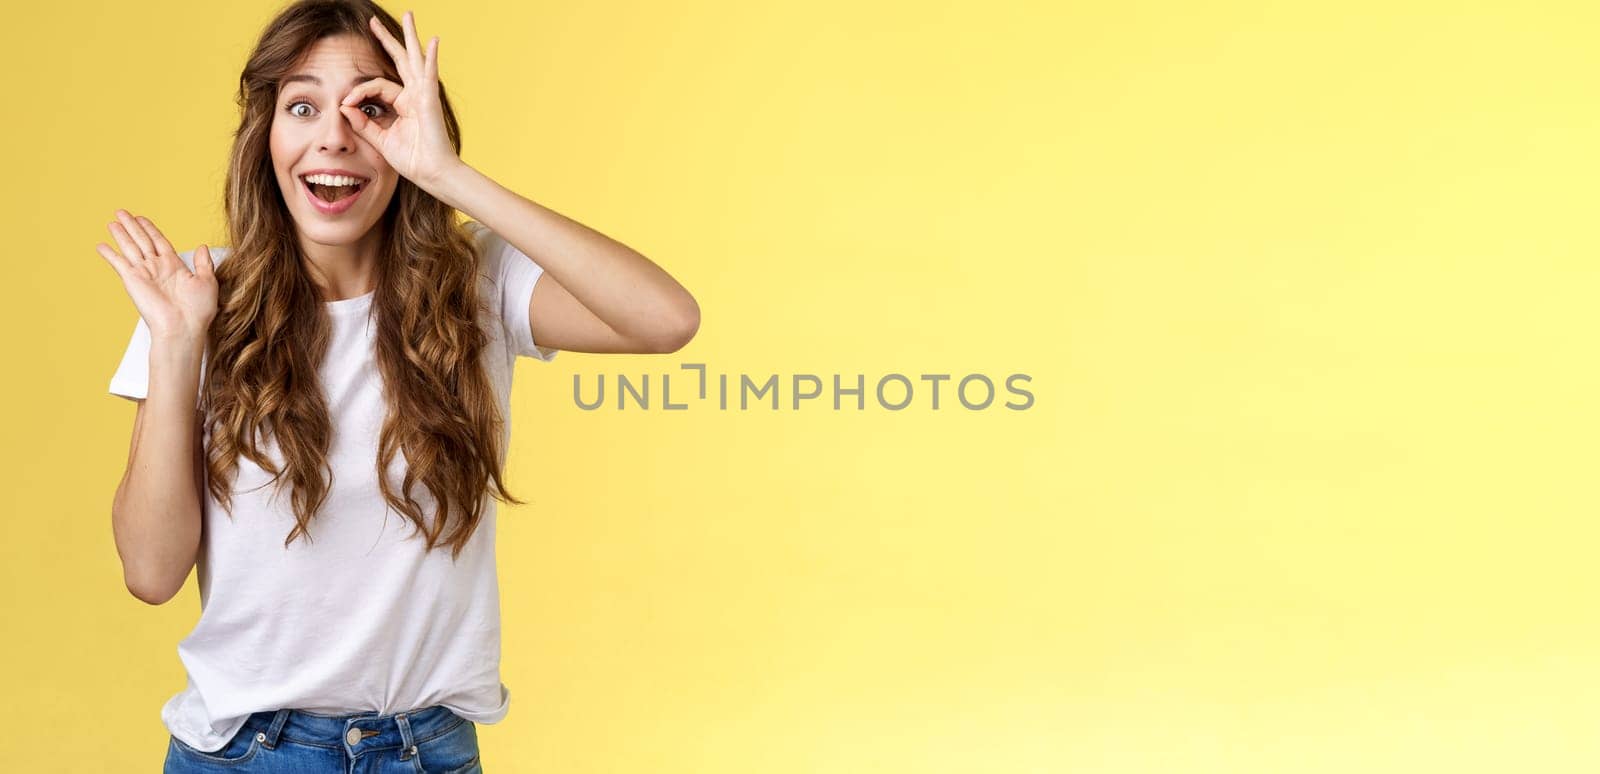 Oh hi I see you. Fascinated cute charming young girl waving palm say hello impressed look through okay ring gesture impressed finally fixed sight stand astonished amazed yellow background.